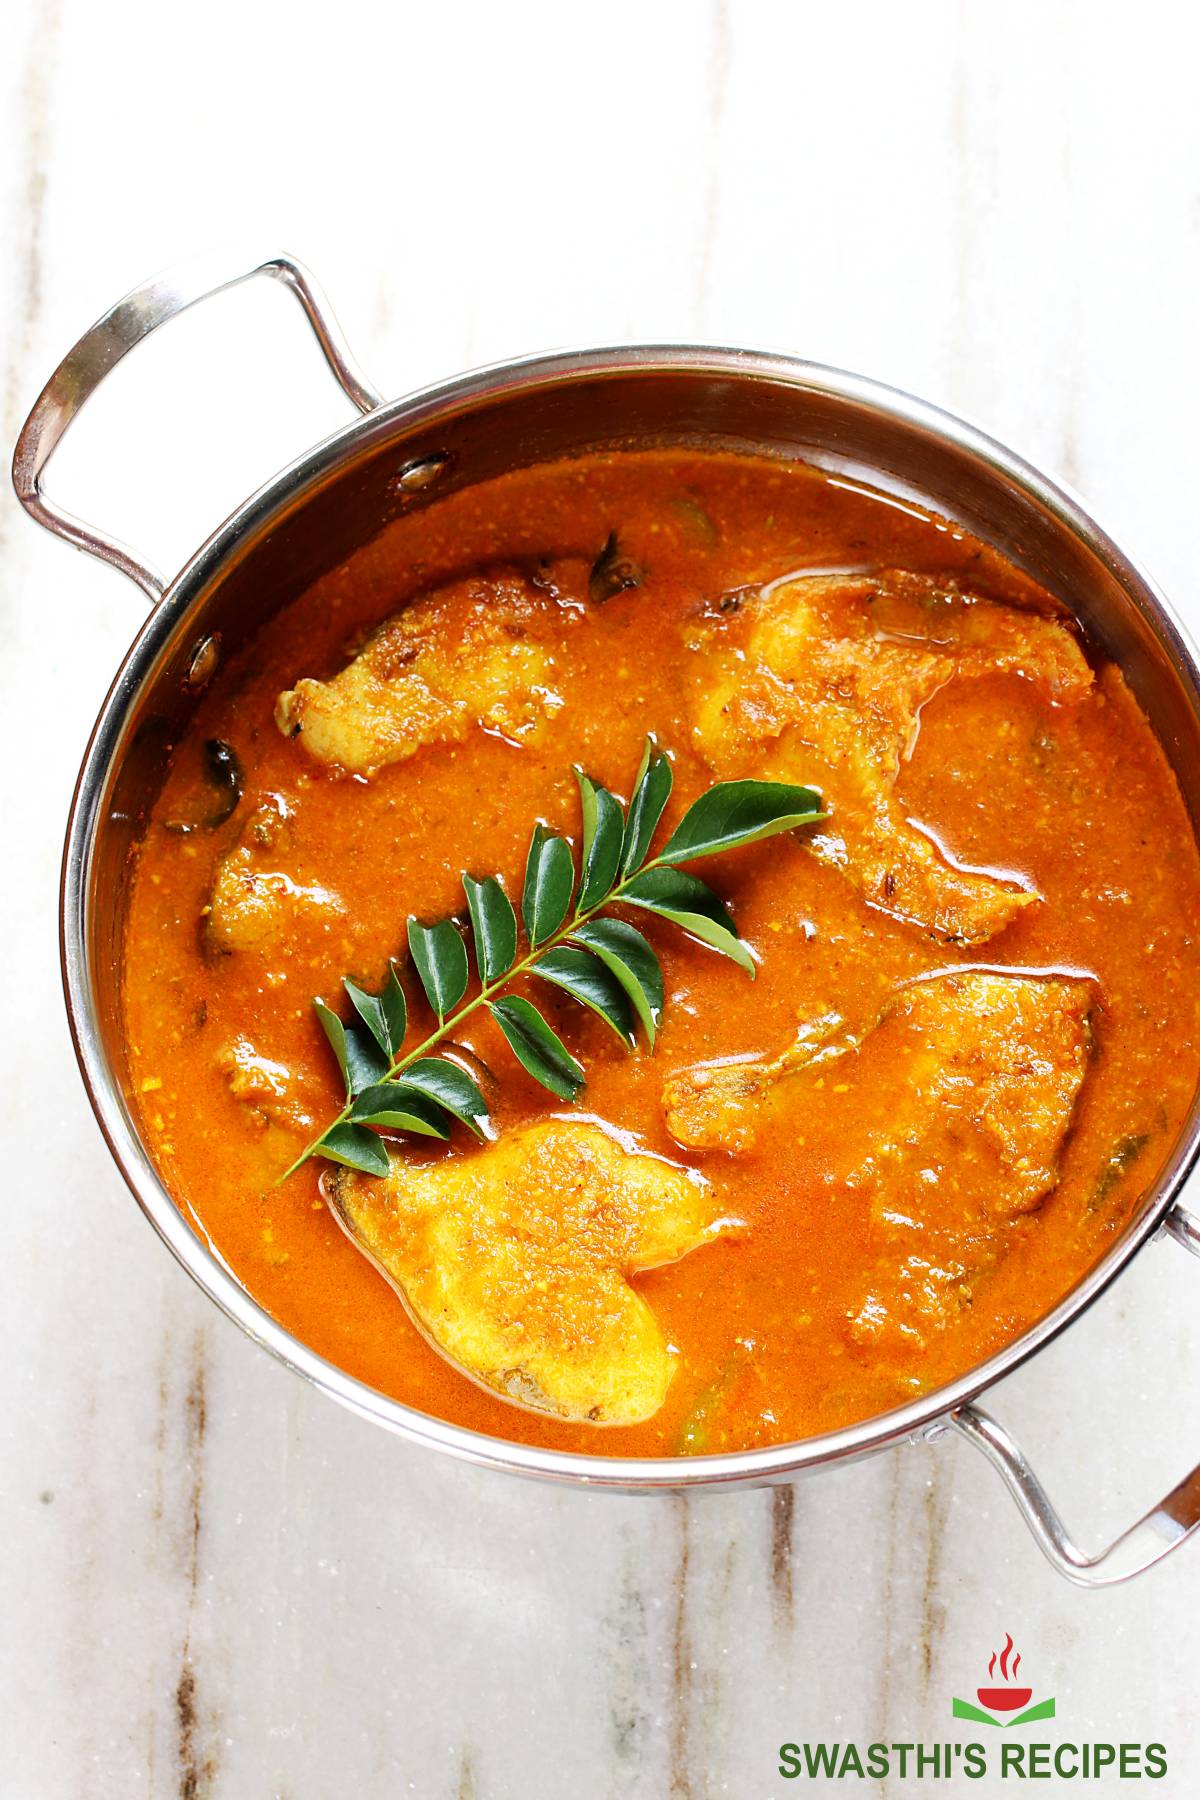 Fish curry recipe (Indian fish masala) - Hanlon Whaters